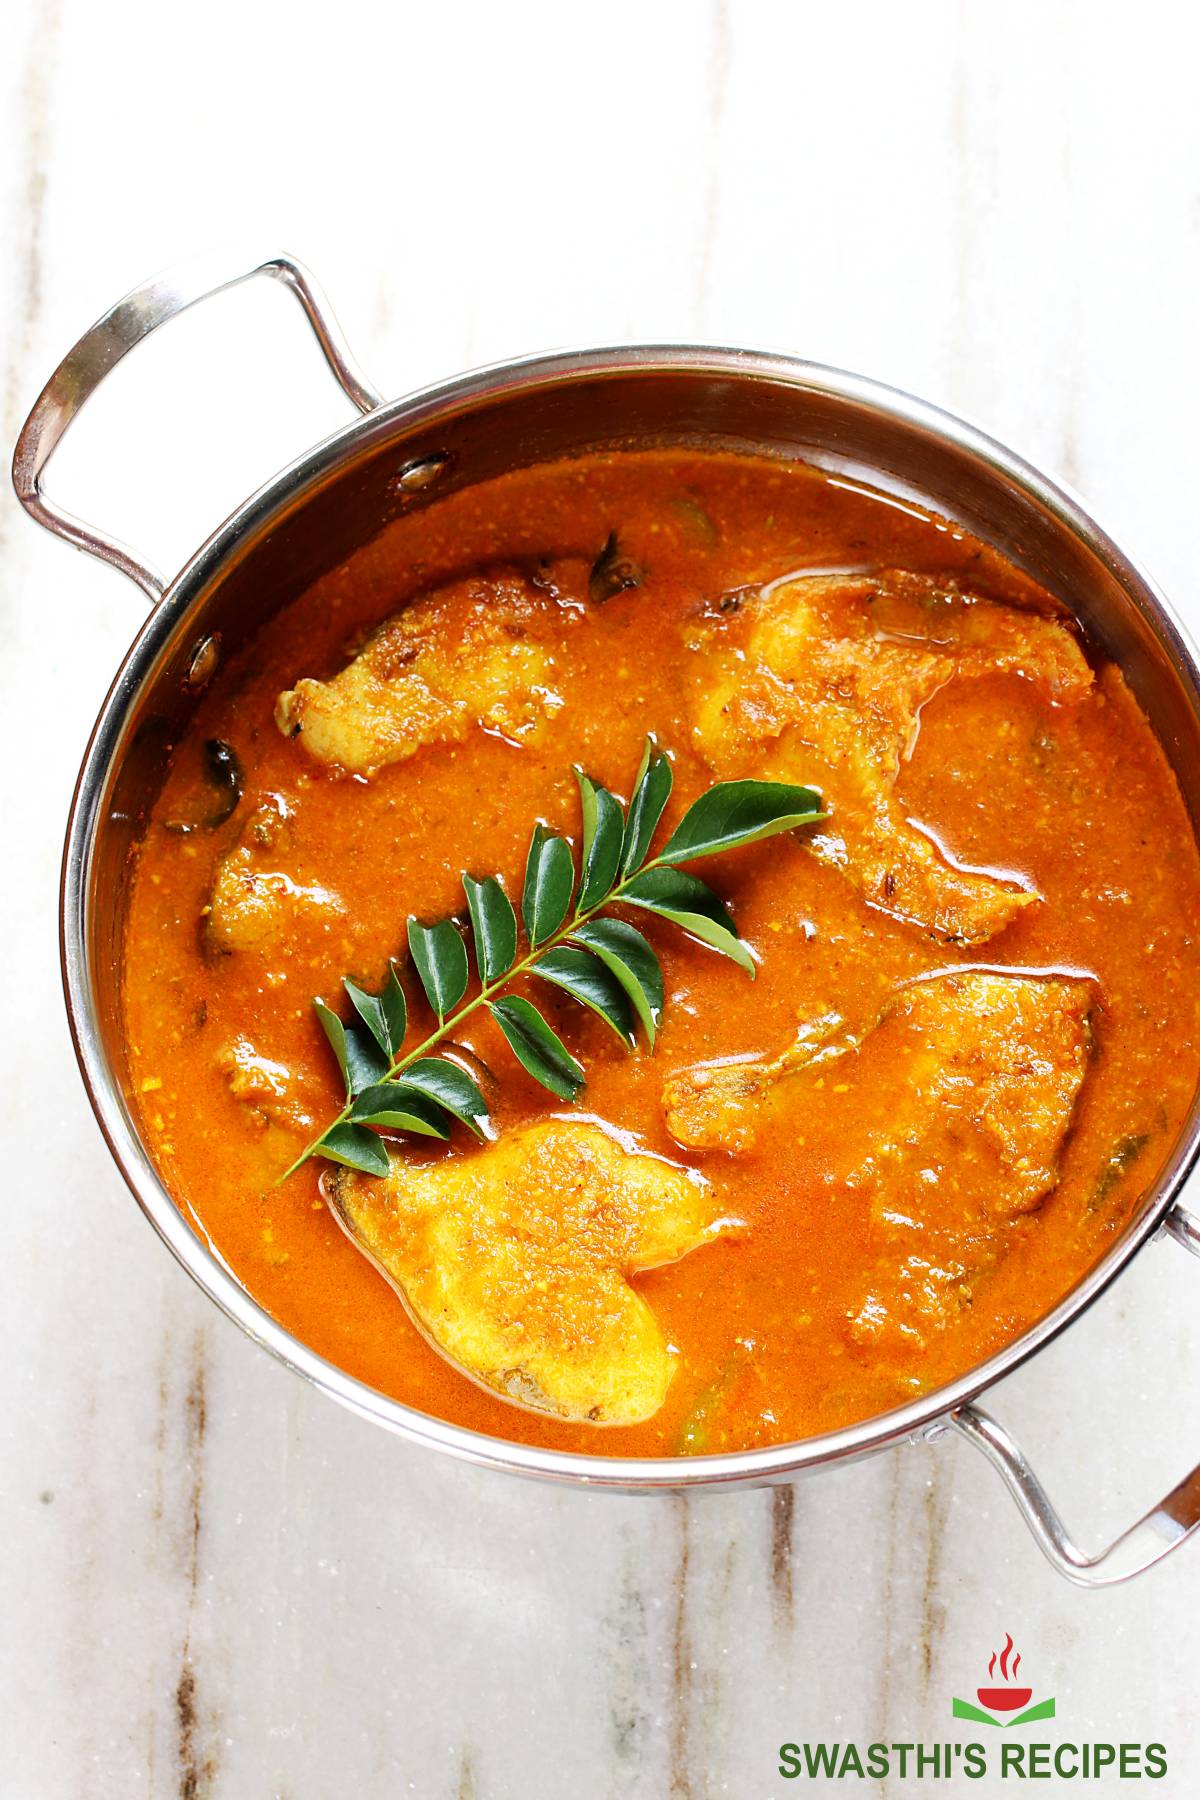 Fish curry recipe (Indian fish masala) - Hanlon Whaters